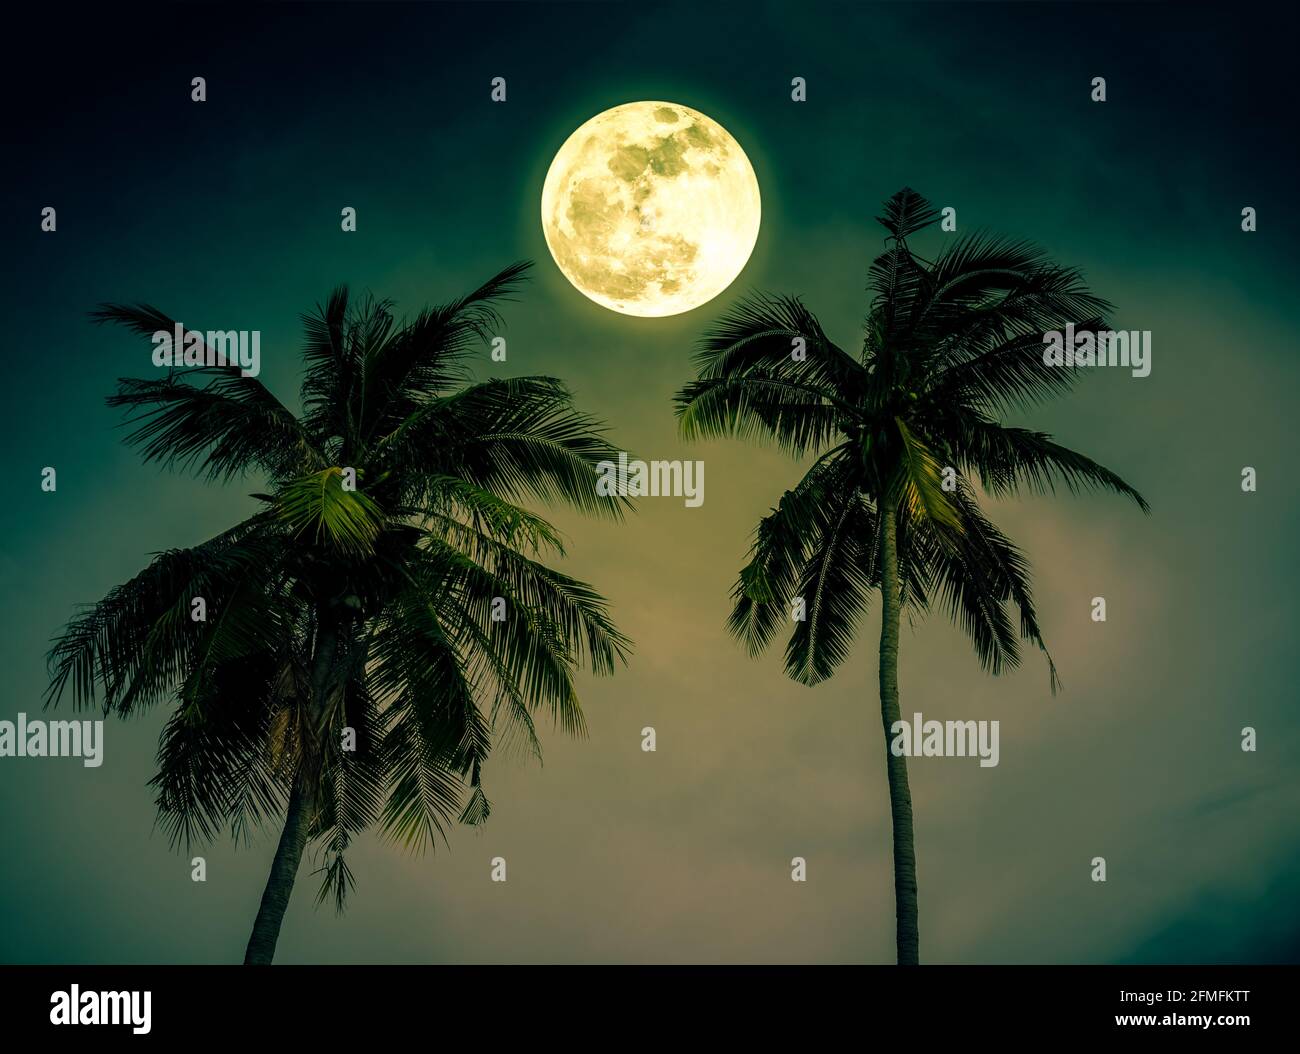 Beautiful night landscape of green sky with bright full moon over coconut palm. Serenity nature background. Outdoor at nighttime. The moon taken with Stock Photo